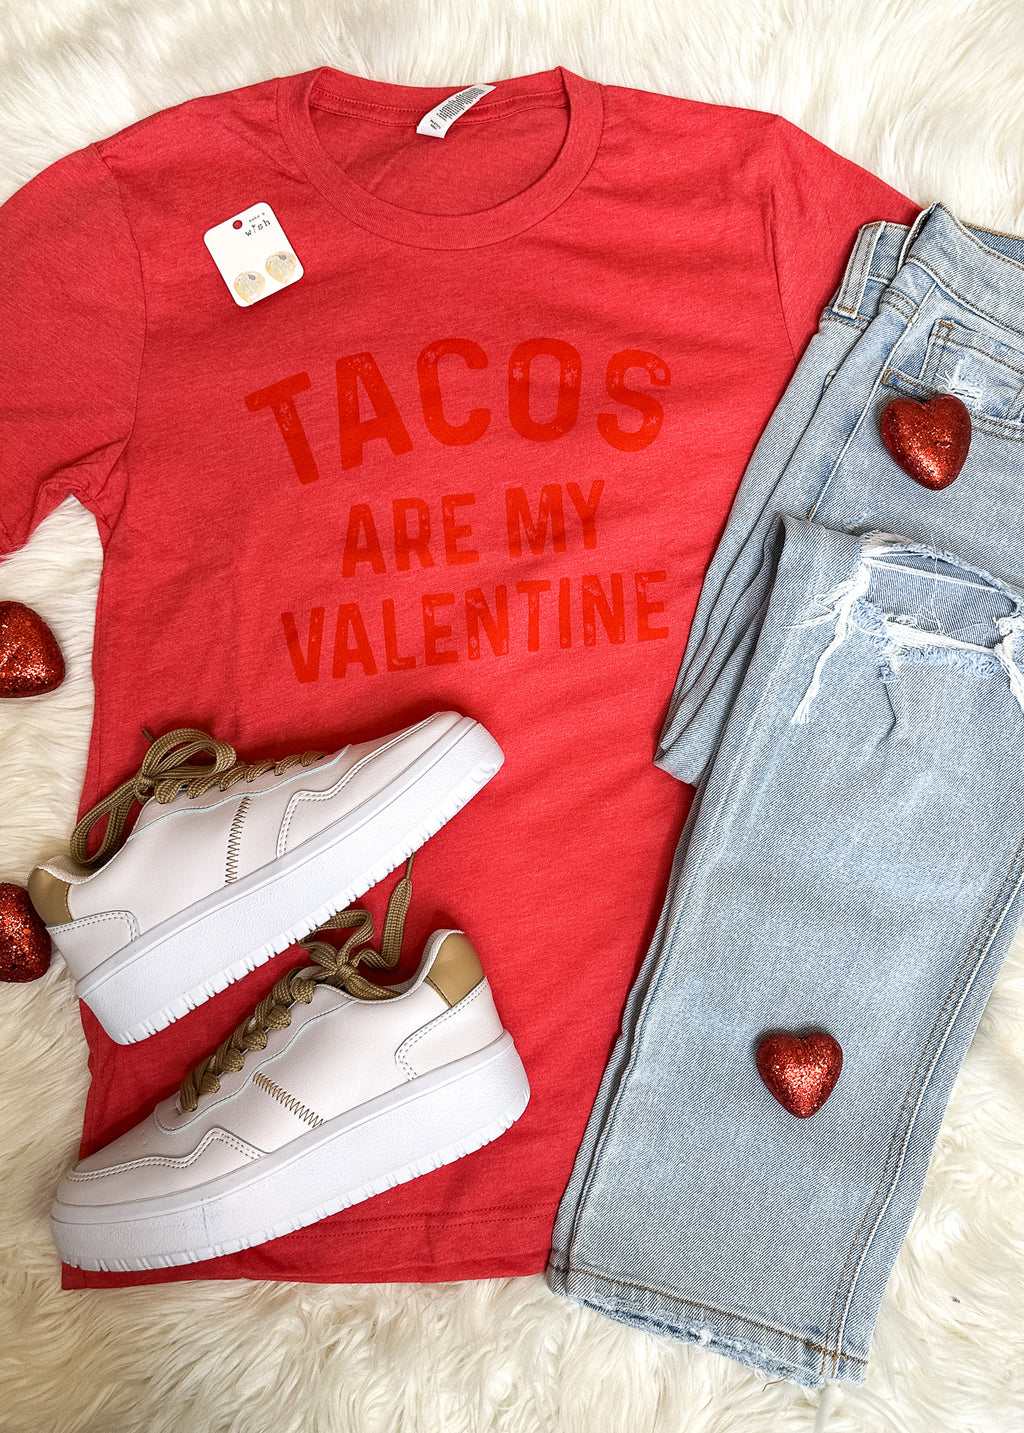 Tacos Are My Valentine Tee (S-XL)